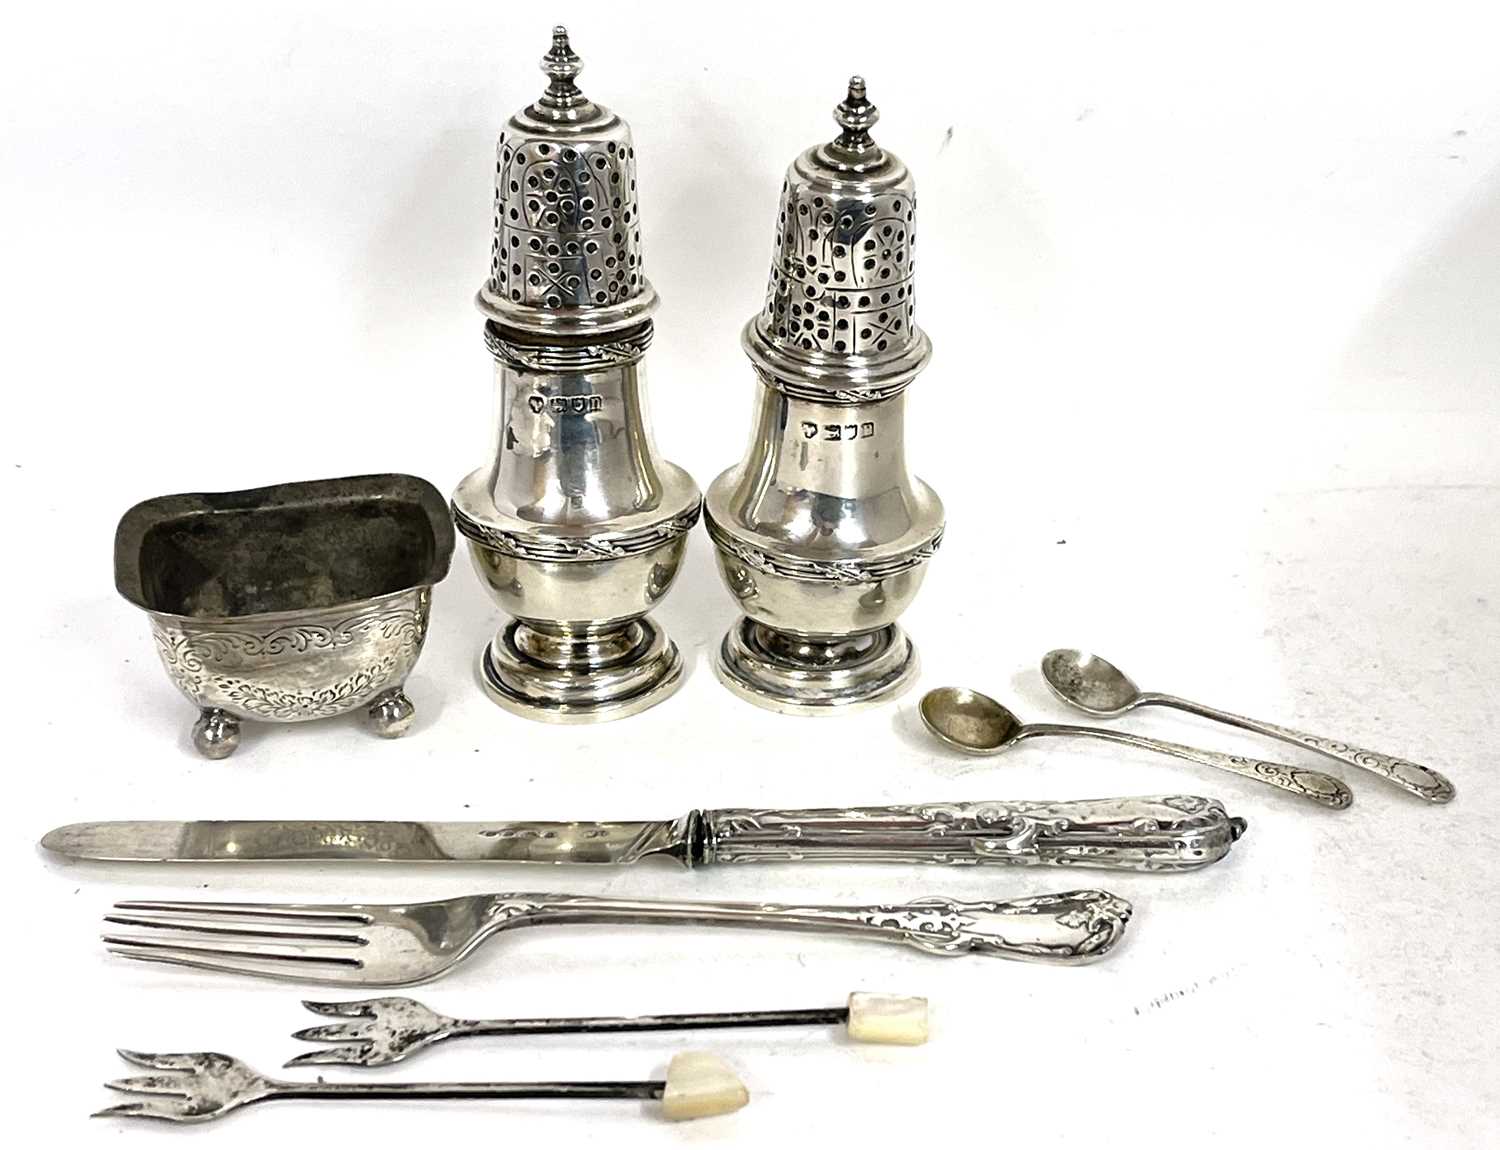 Mixed Lot: A pair of Edwardian silver peppers, London 1908, makers mark for Holland Alwinkle & - Image 2 of 2